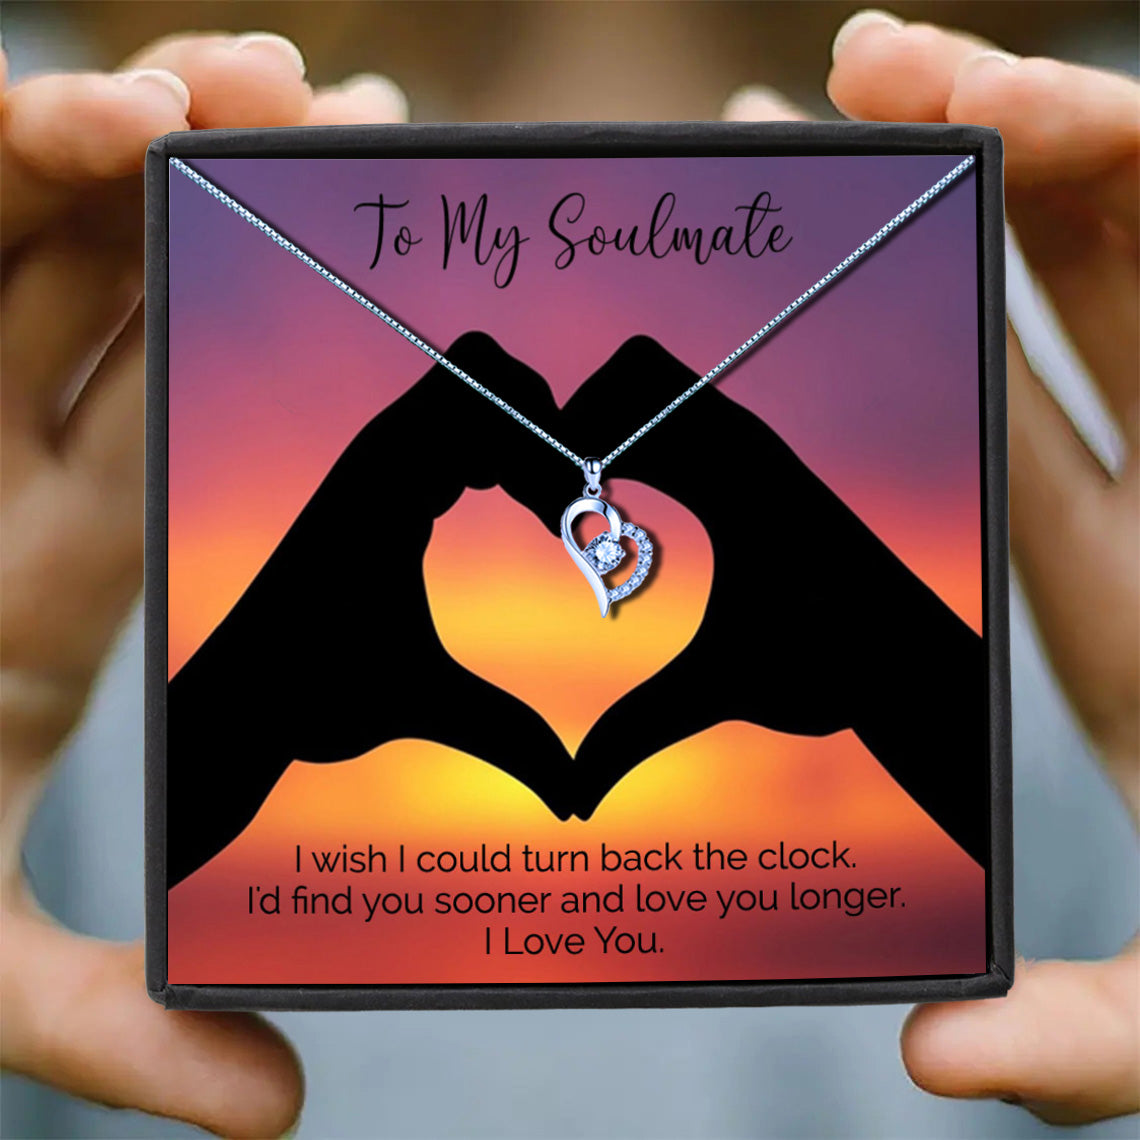 To My Soulmate - Sunset Heart Message Necklace